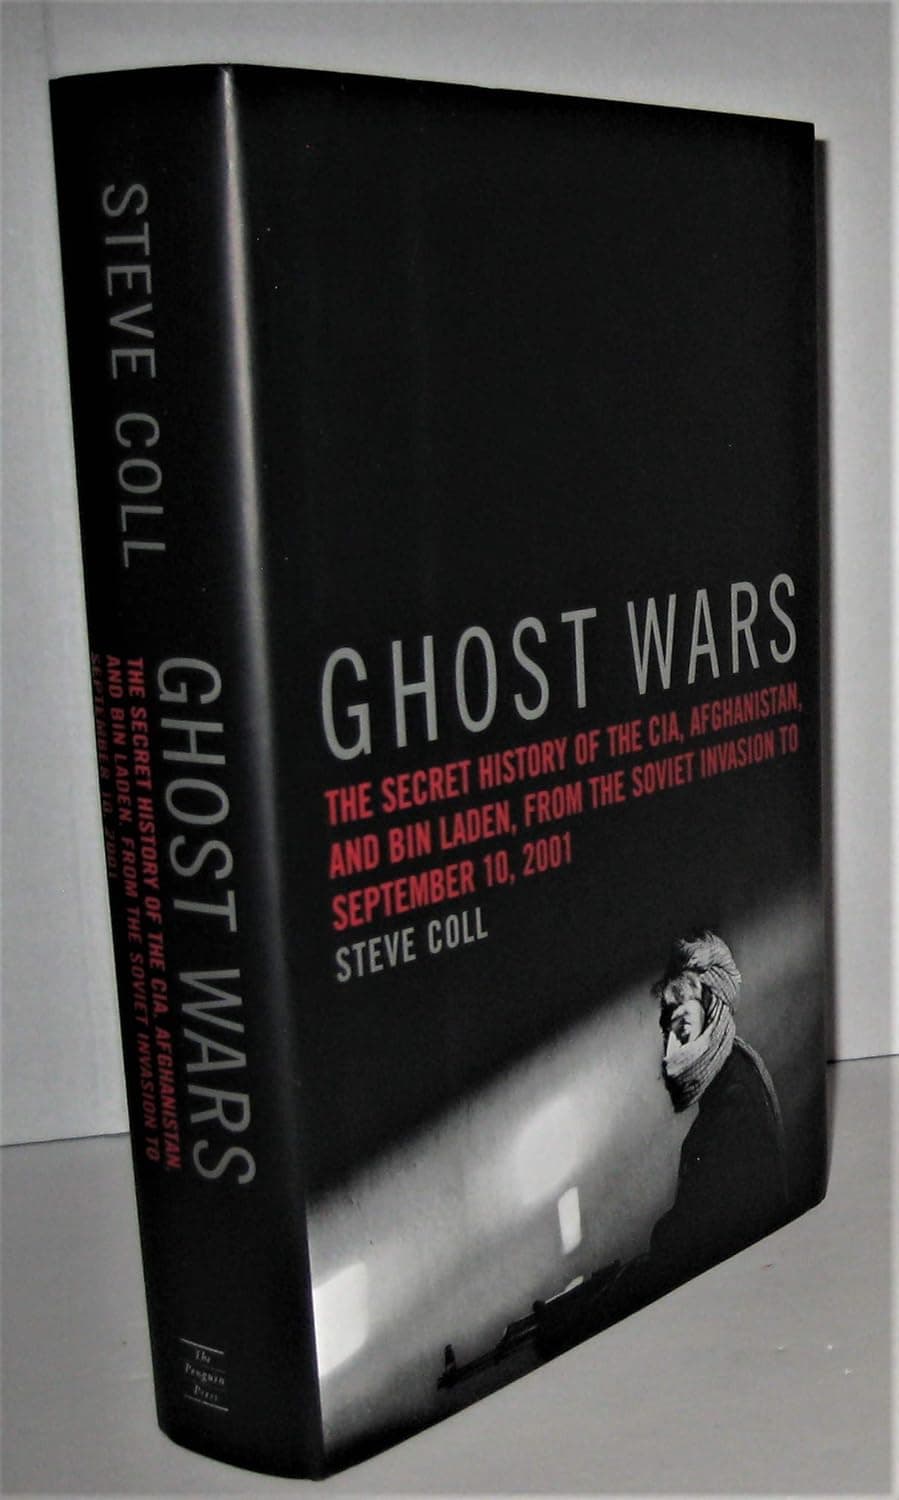 Ghost Wars The Secret History of the CIA, Afghanistan, and Bin Laden, from the Soviet Invasion to September 10, 2001